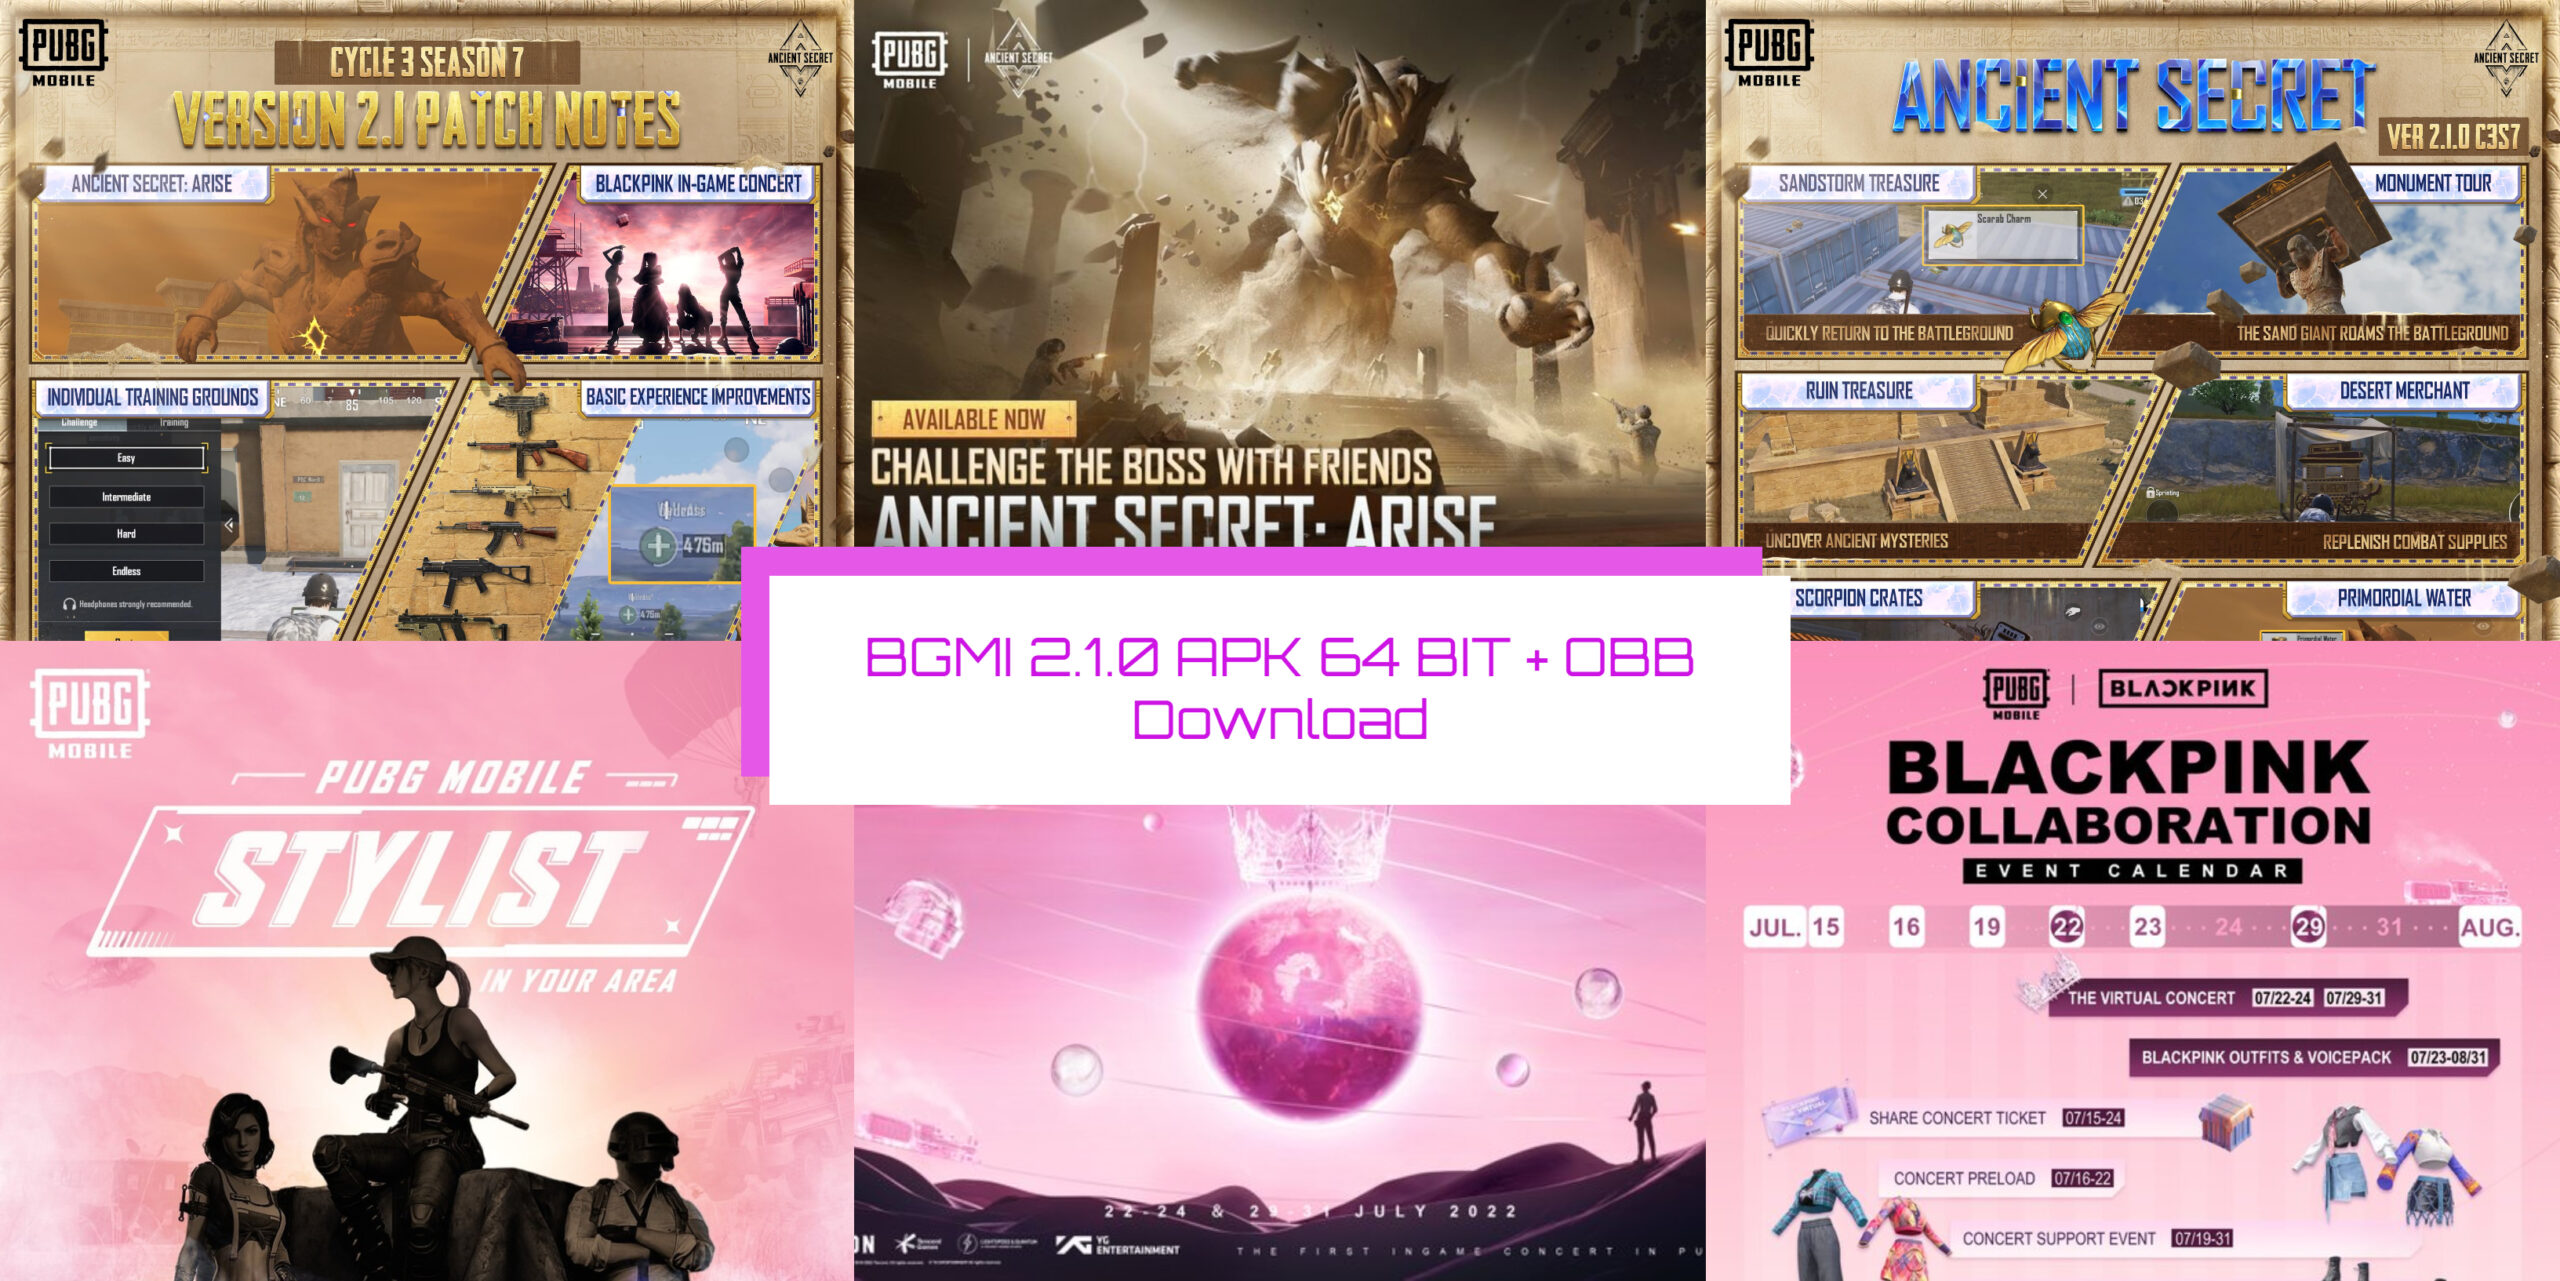 You are currently viewing BGMI 2.1.0 APK 64 BIT + OBB Download